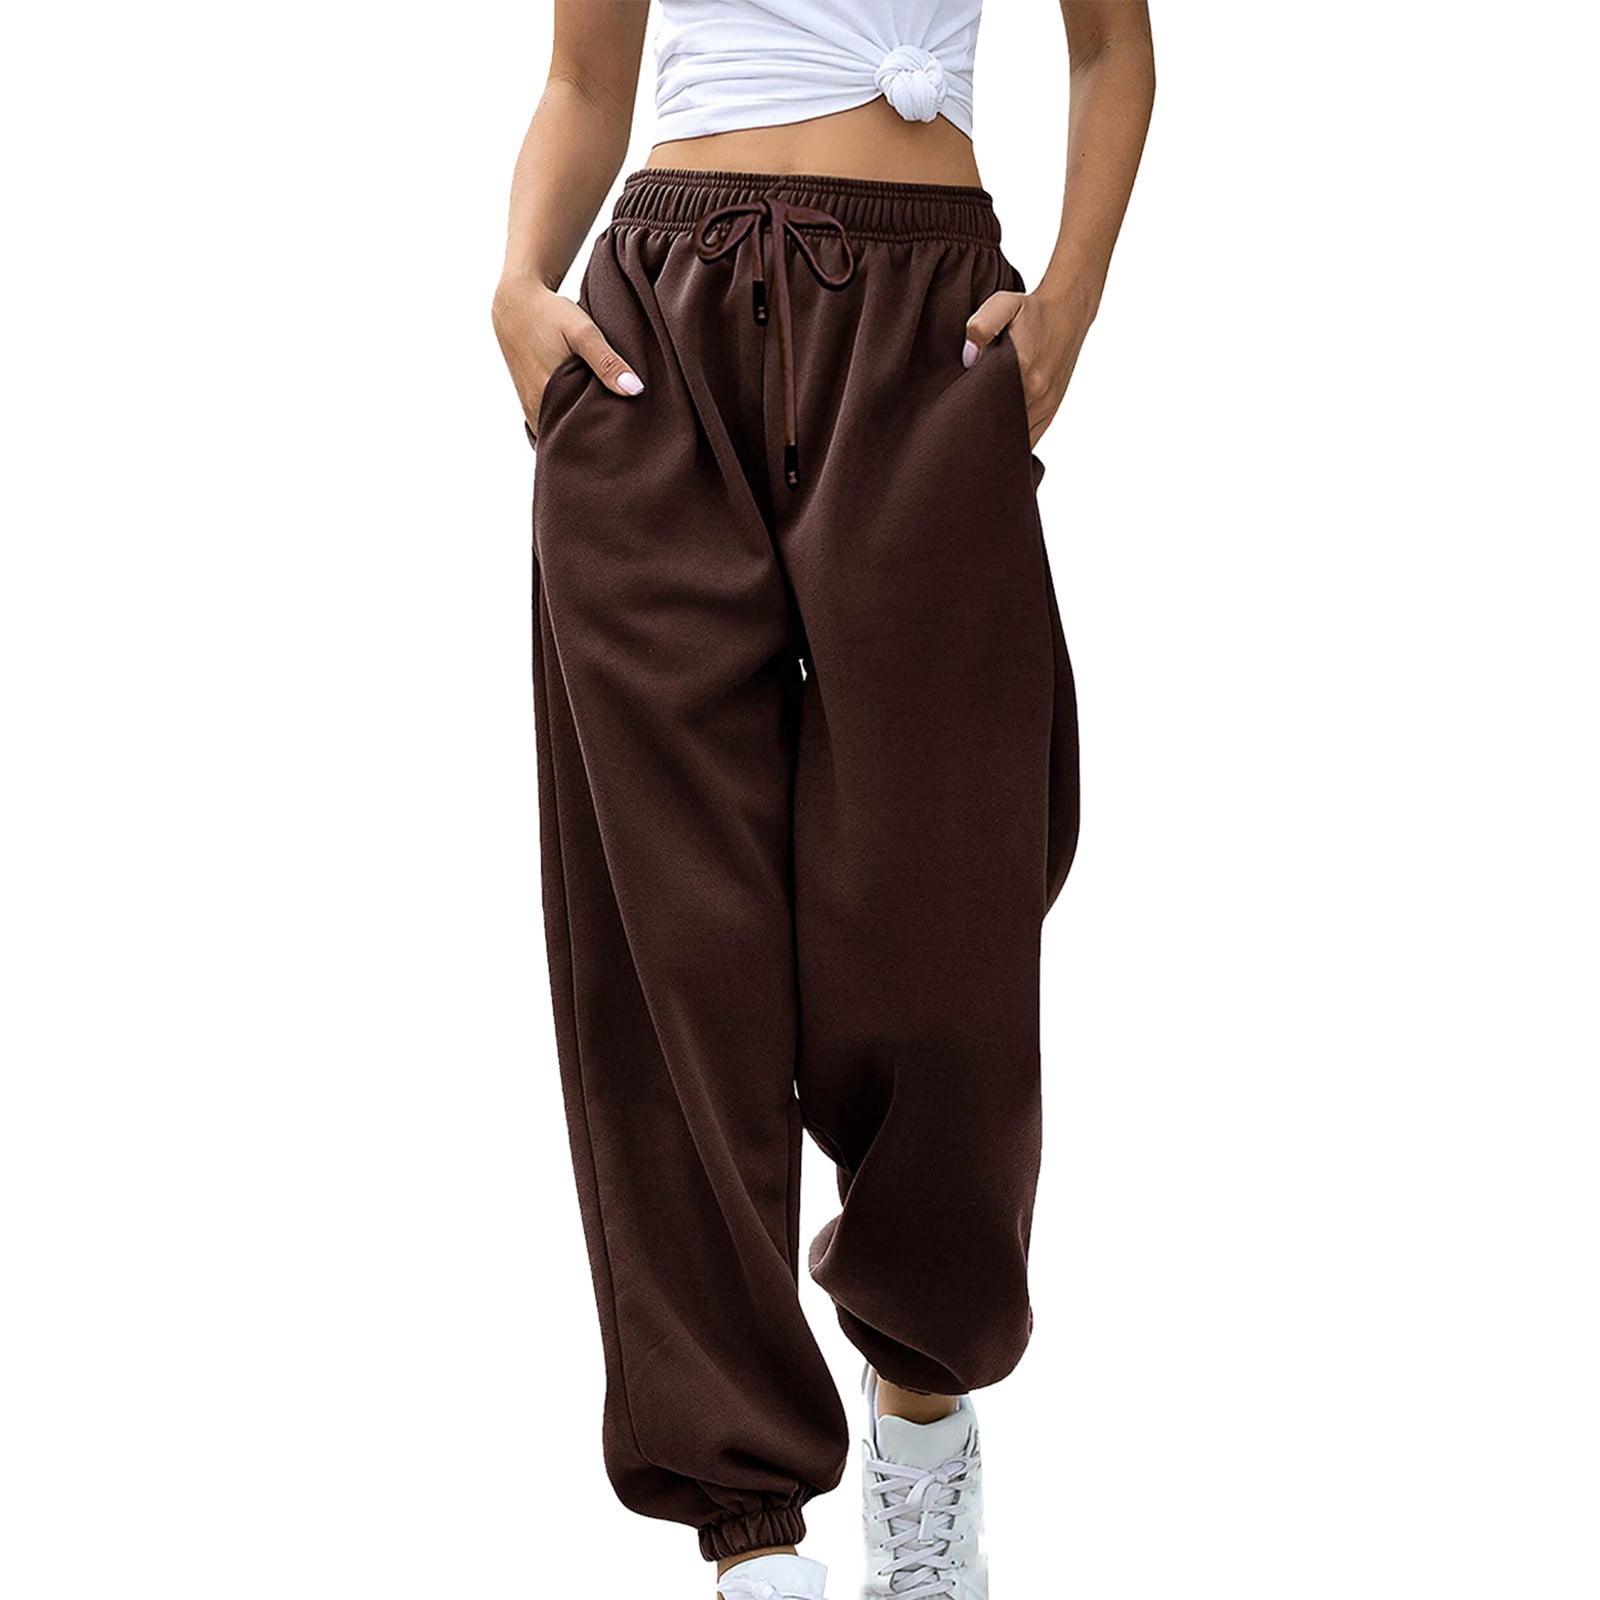 Ecqkame Women's Sweatpants Clearance Women's Fashion Casual Solid Elastic  Waist Trousers Long Straight Pants Red XL 